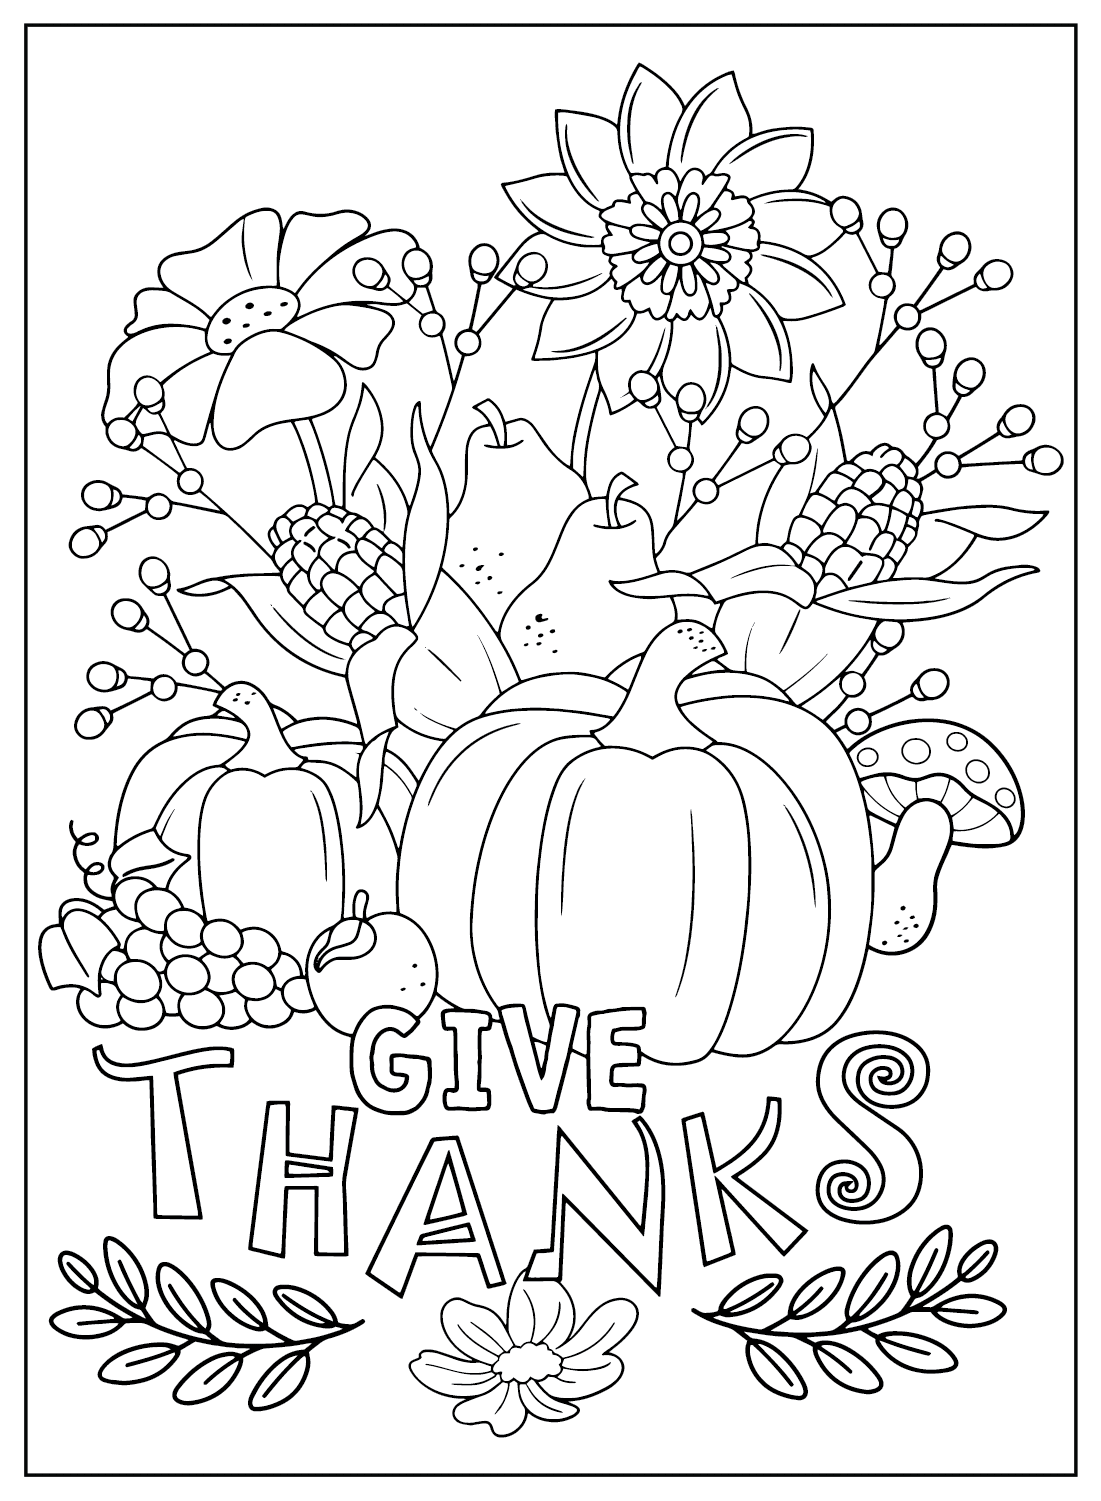 Thanksgiving Color Page - Free Printable Coloring Pages